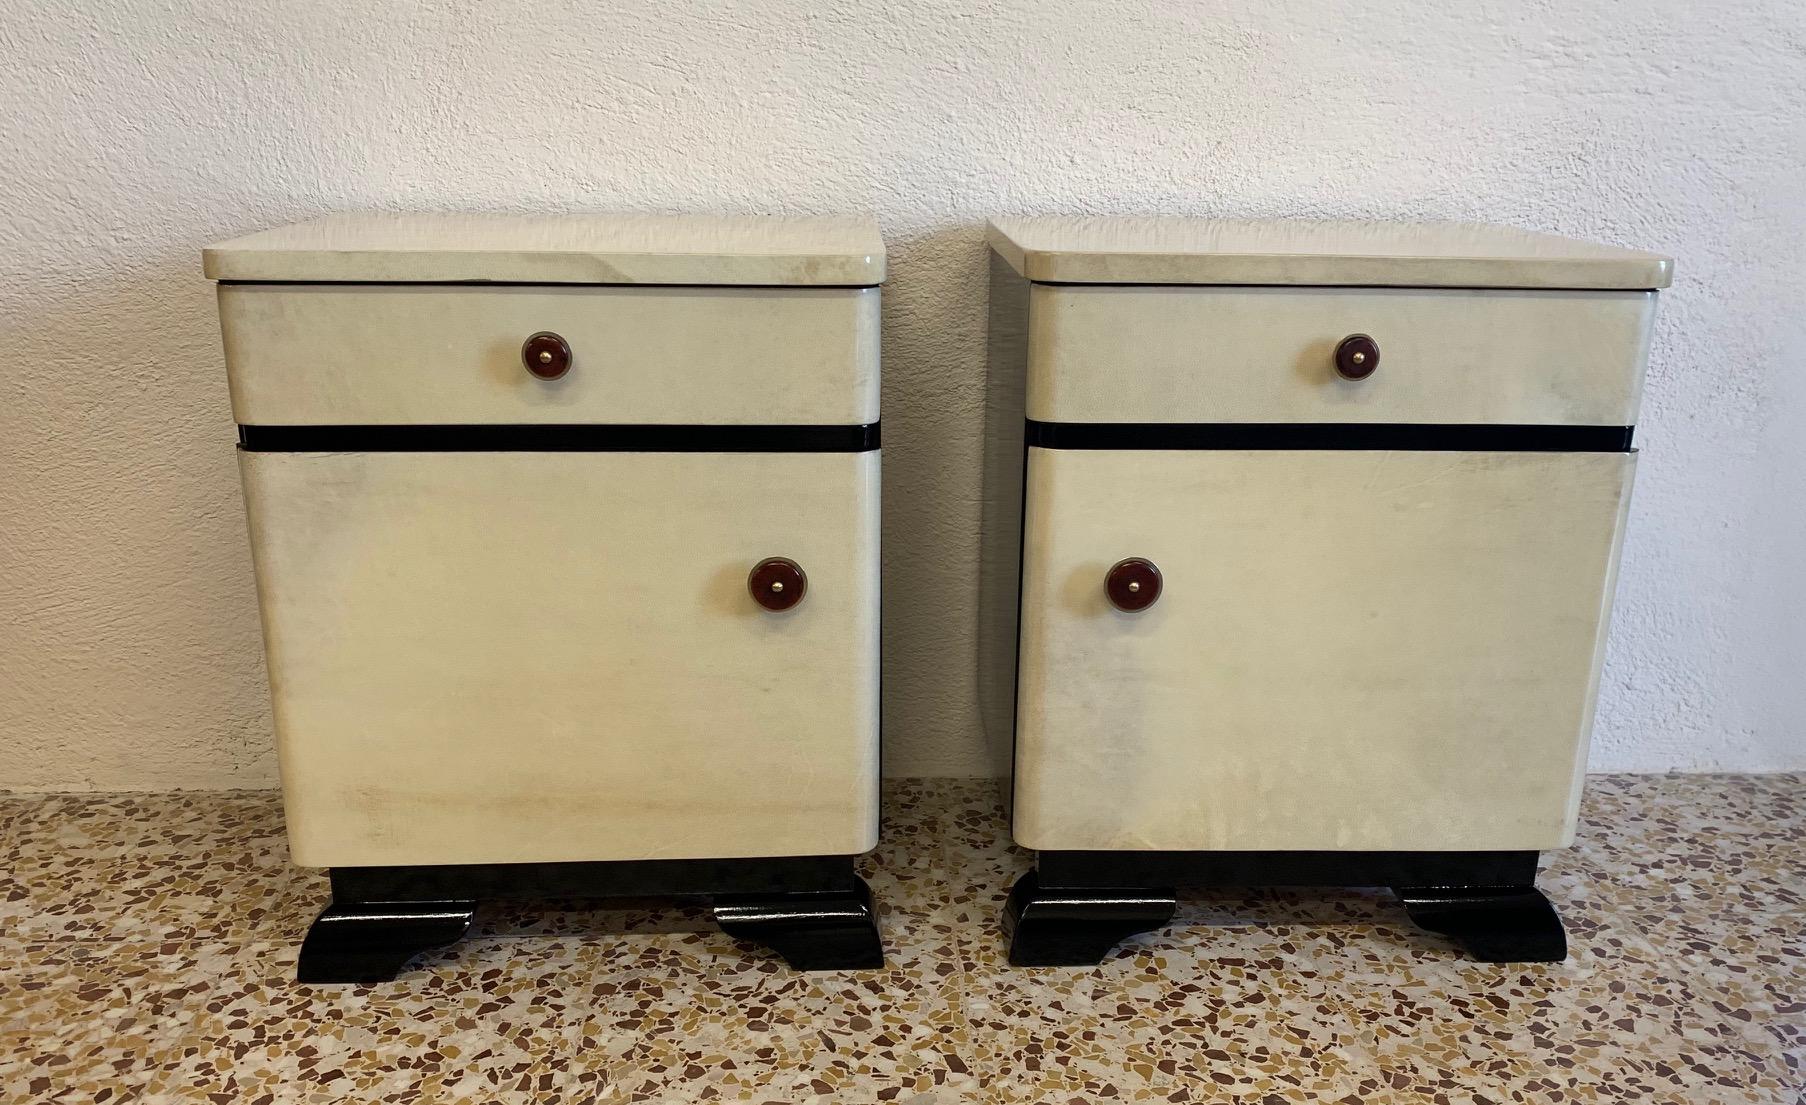 These Art Deco bedside tables were produced in the 1940s in Germany.
The front and the top are covered with parchment while the base and the sides are black lacquered.
The special handles are in brass and Bakelite.